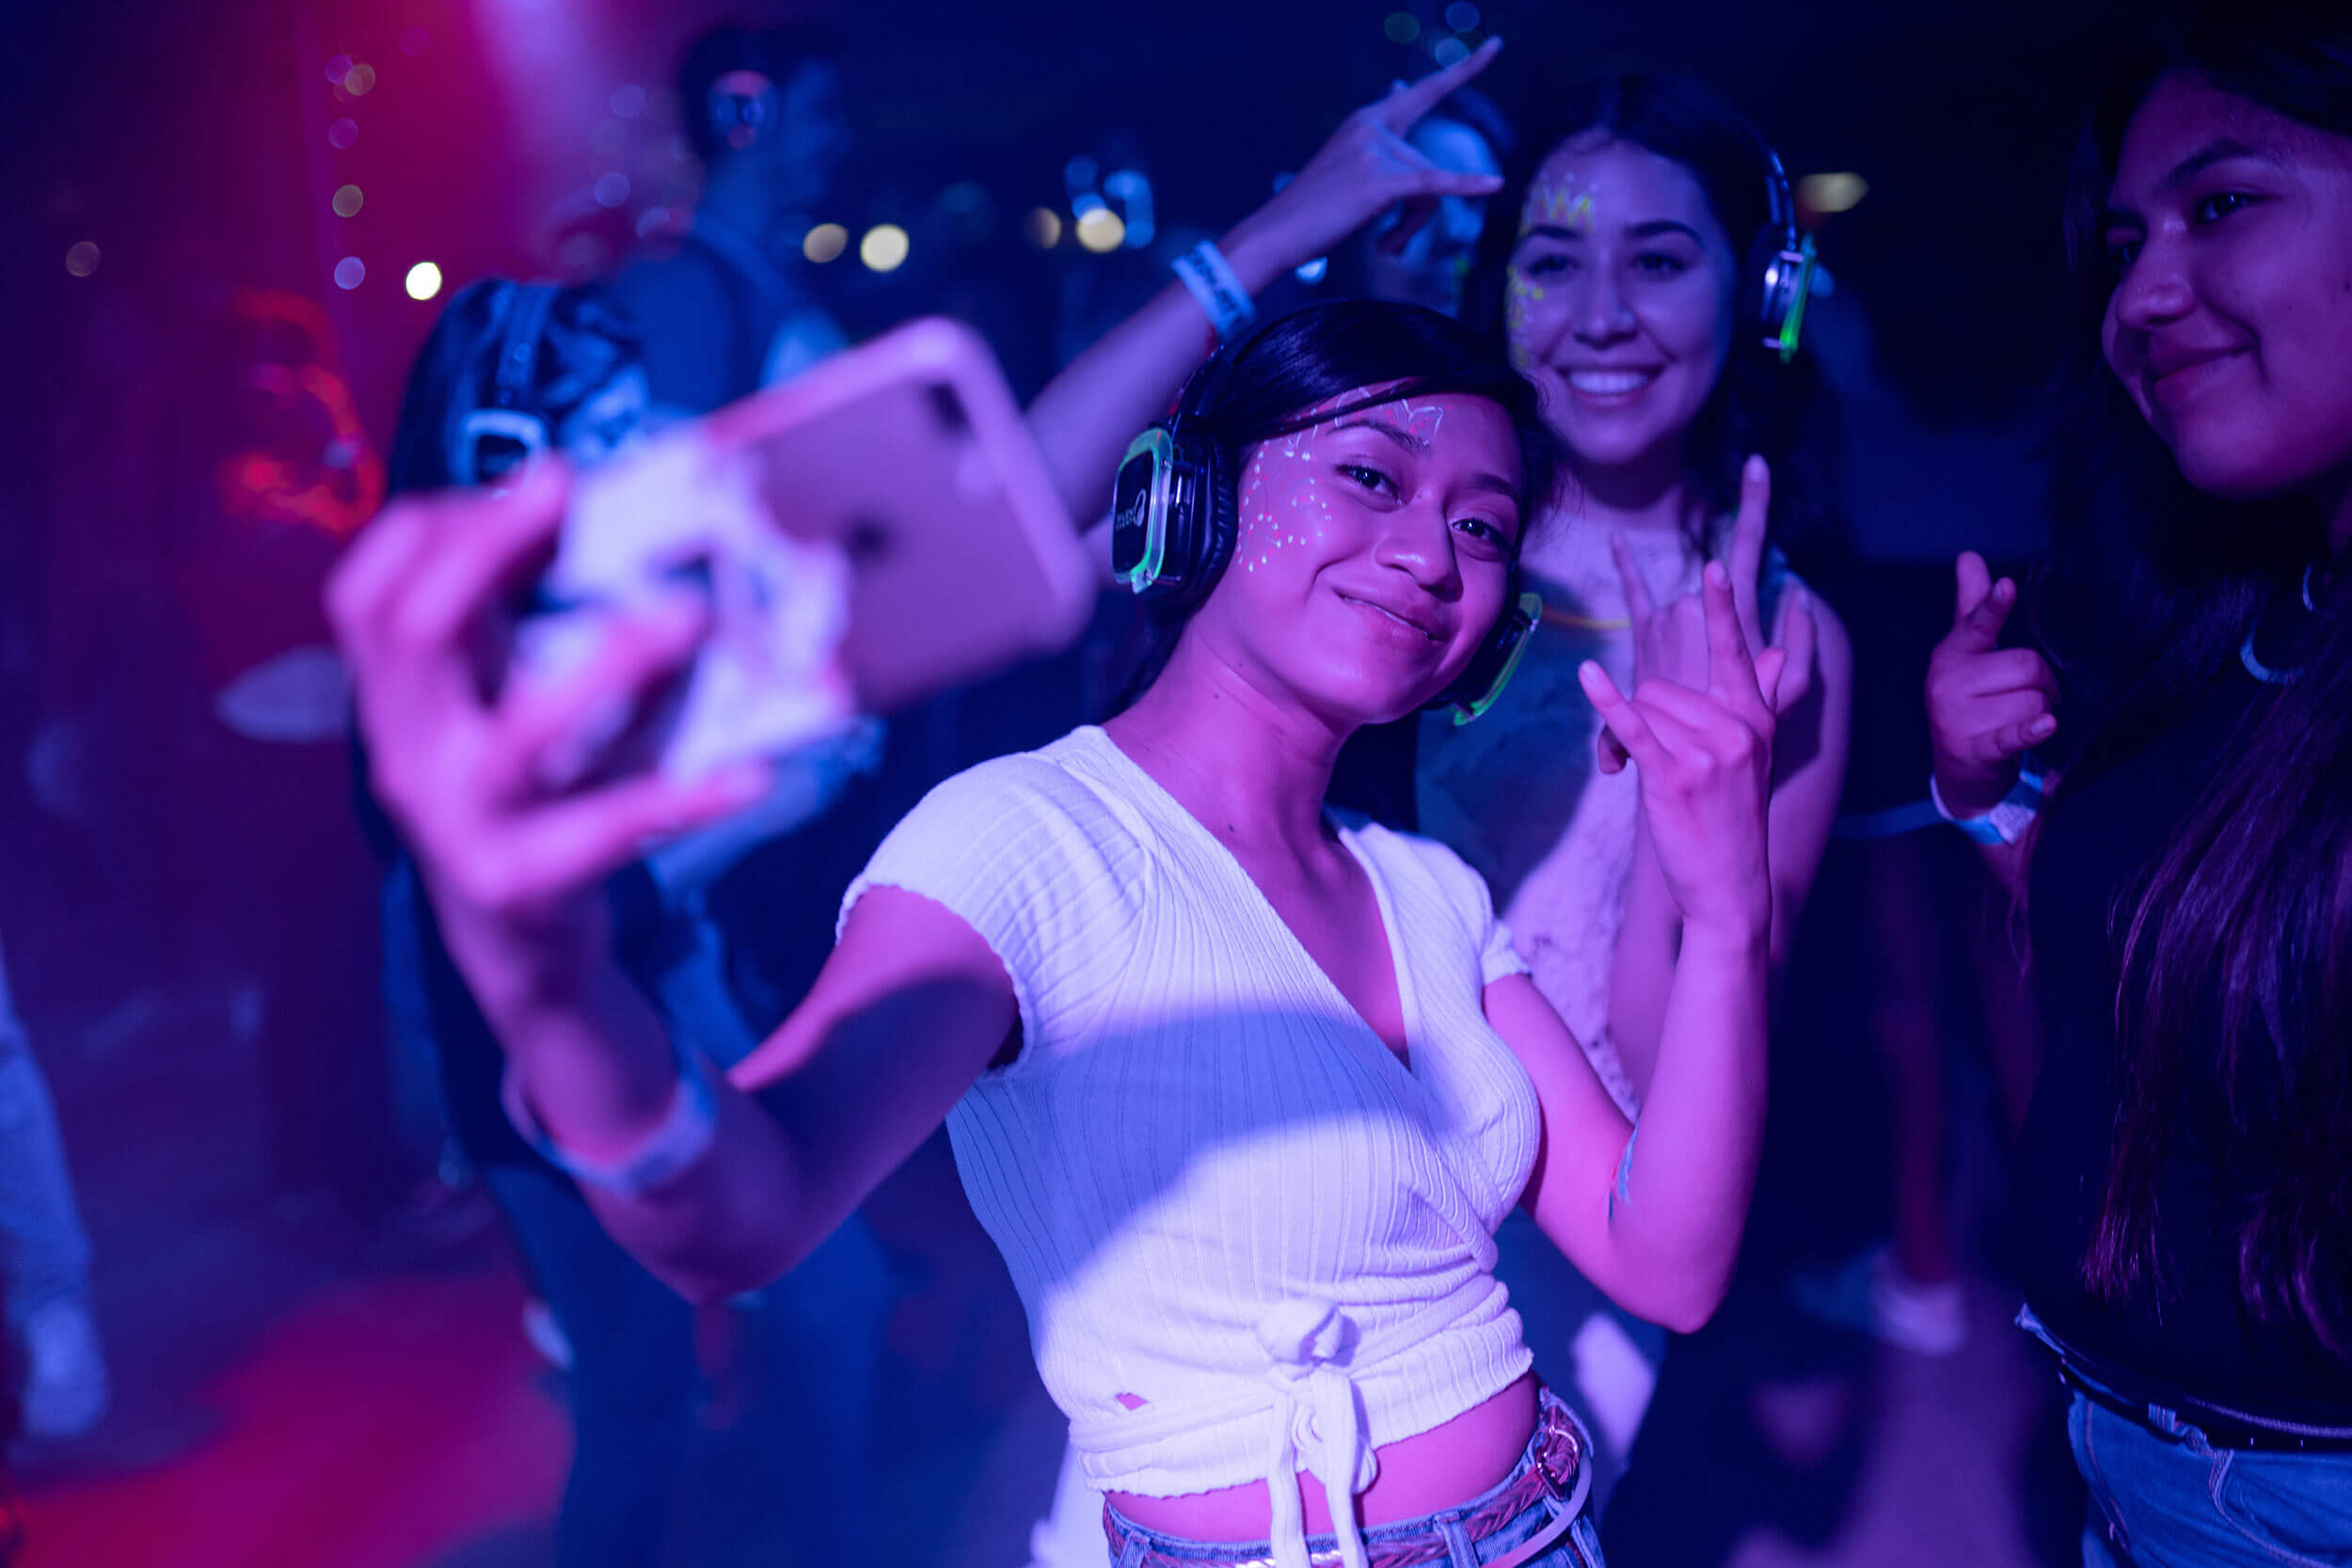 Group of friends with neon face paint take a selfie at a silent rave.